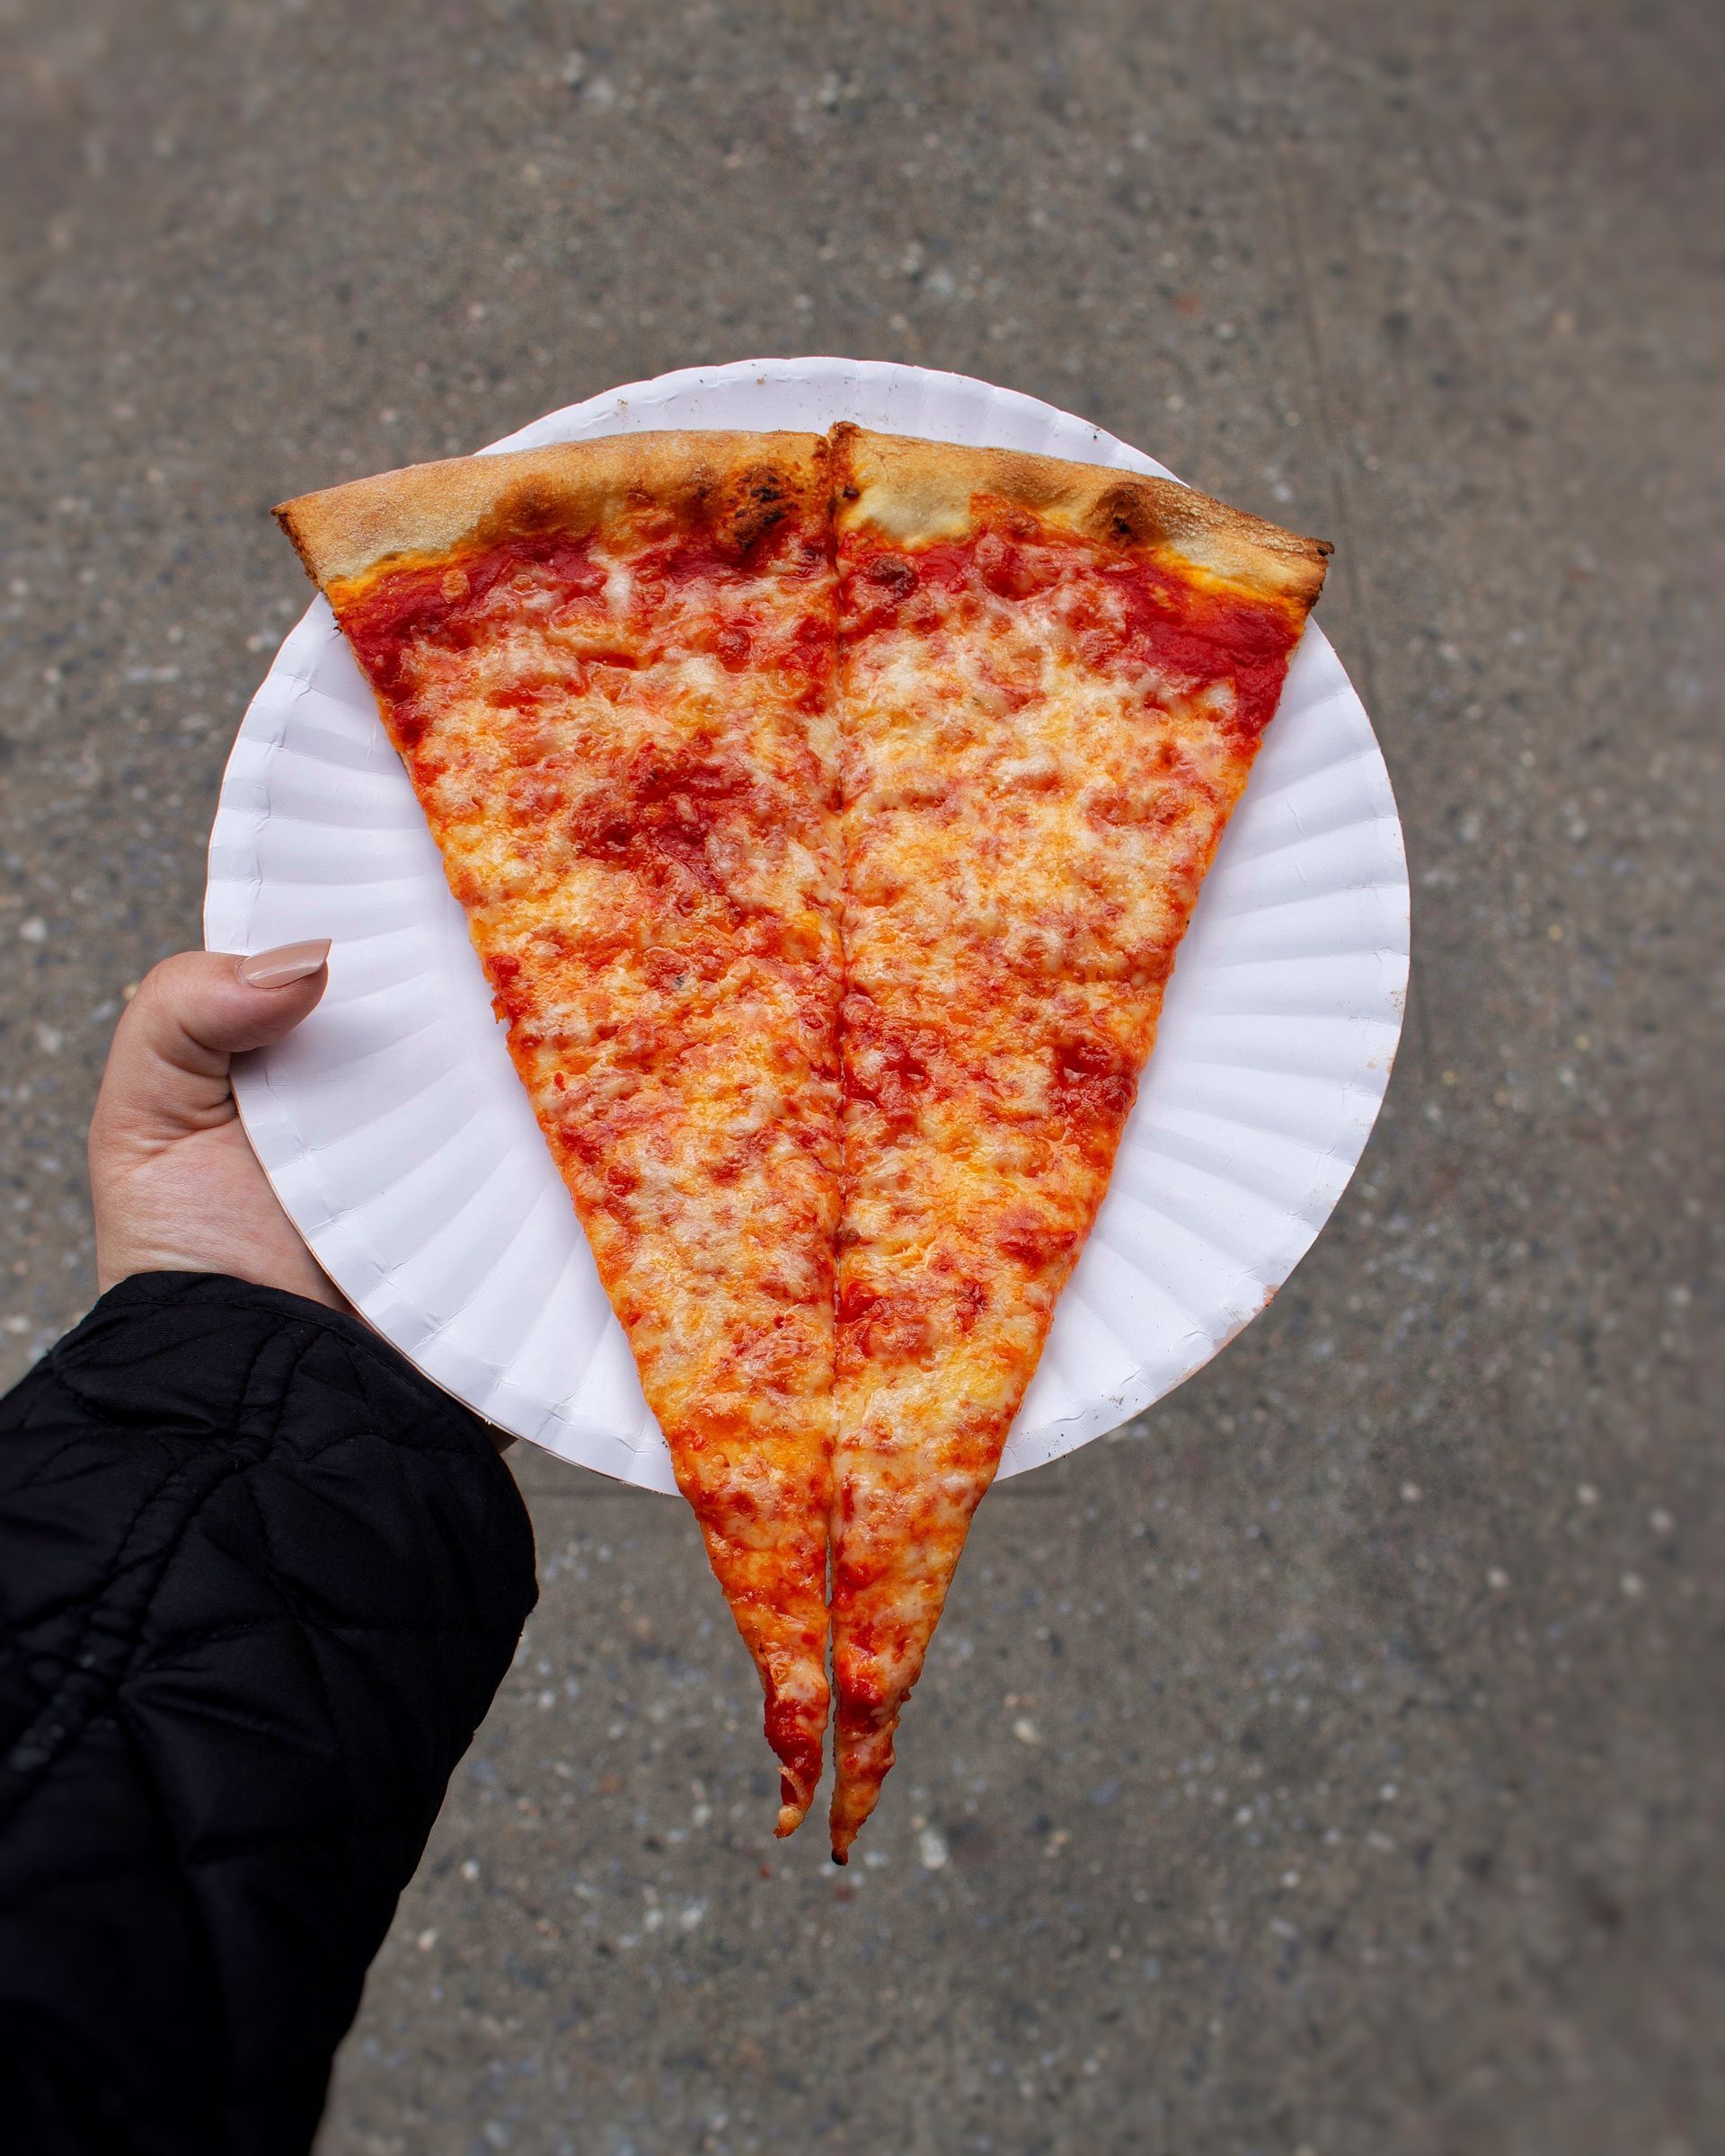 Slice of New York Style pizza with a crispy crust, tomato sauce and melted mozzarella cheese